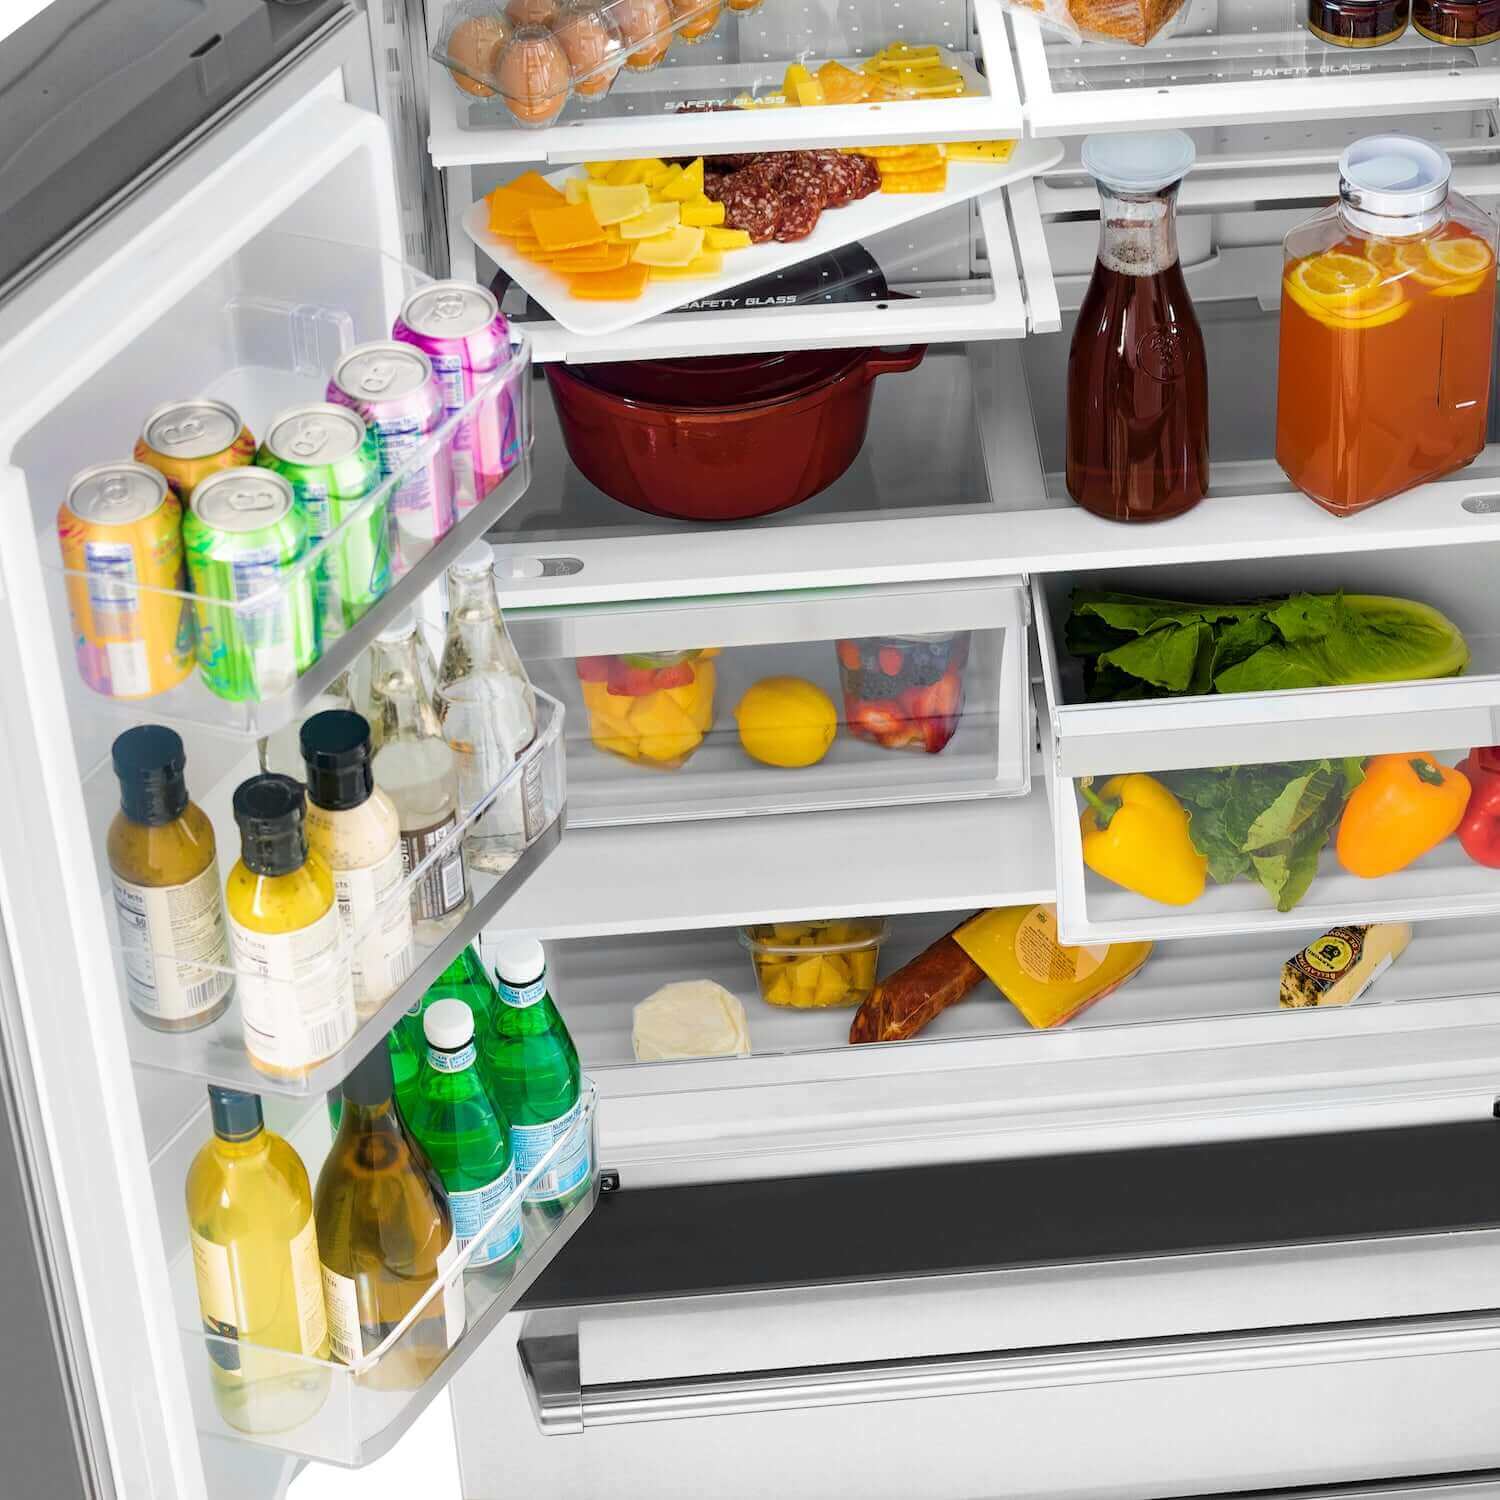 Food and drinks inside refrigerator compartment from above.